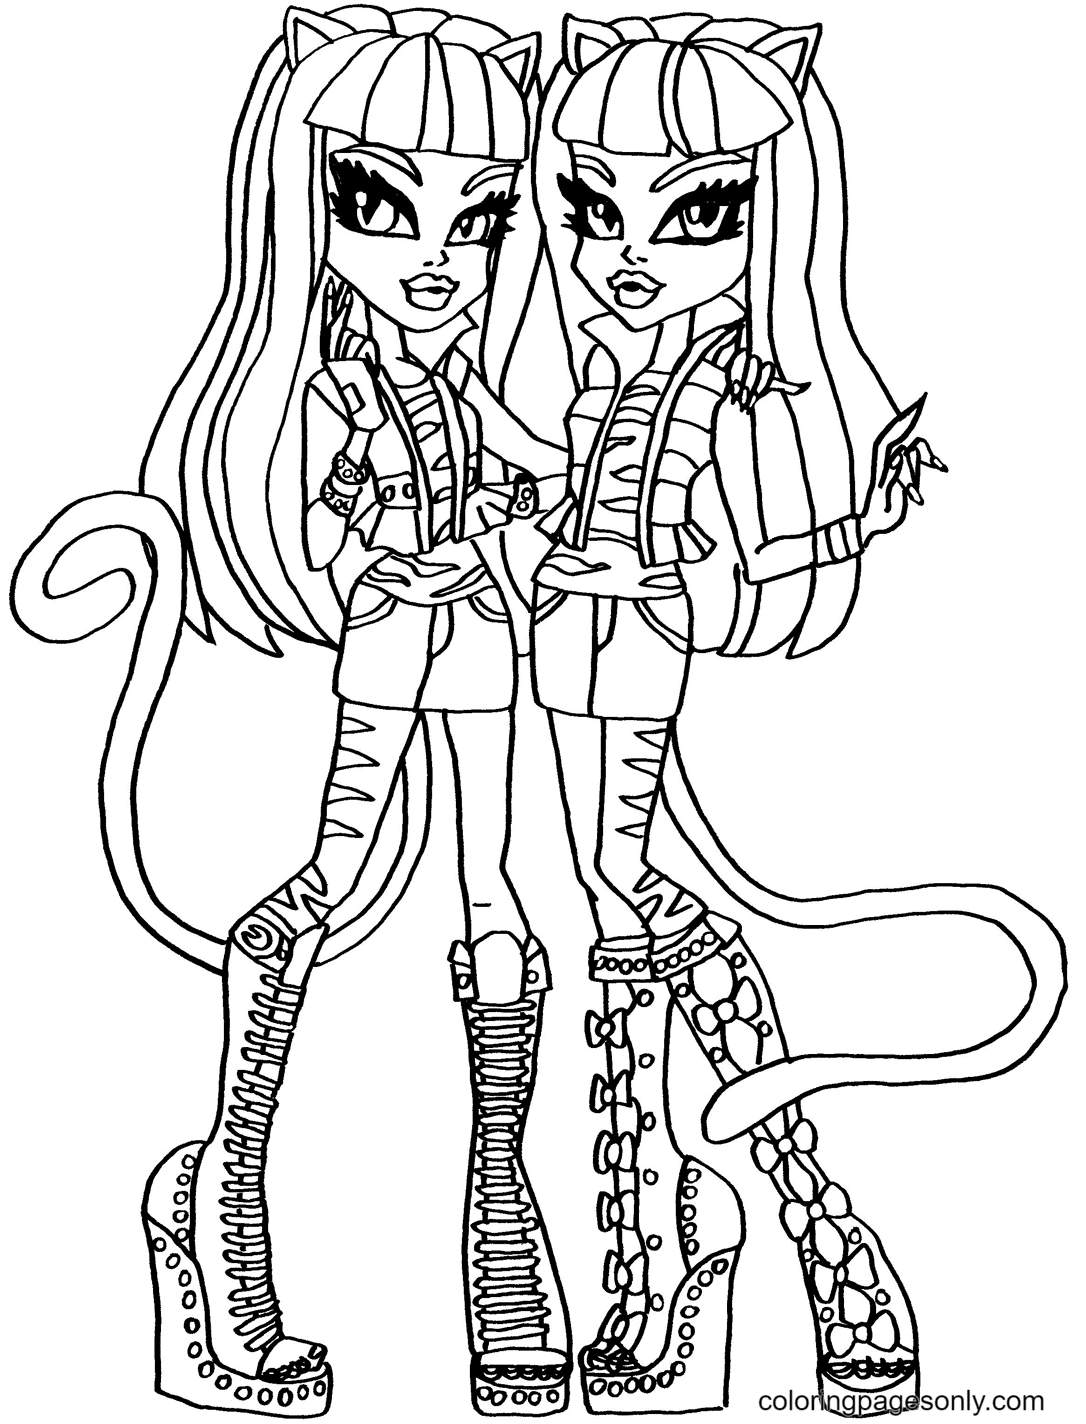 Purrsephone and Meowlody Coloring Page